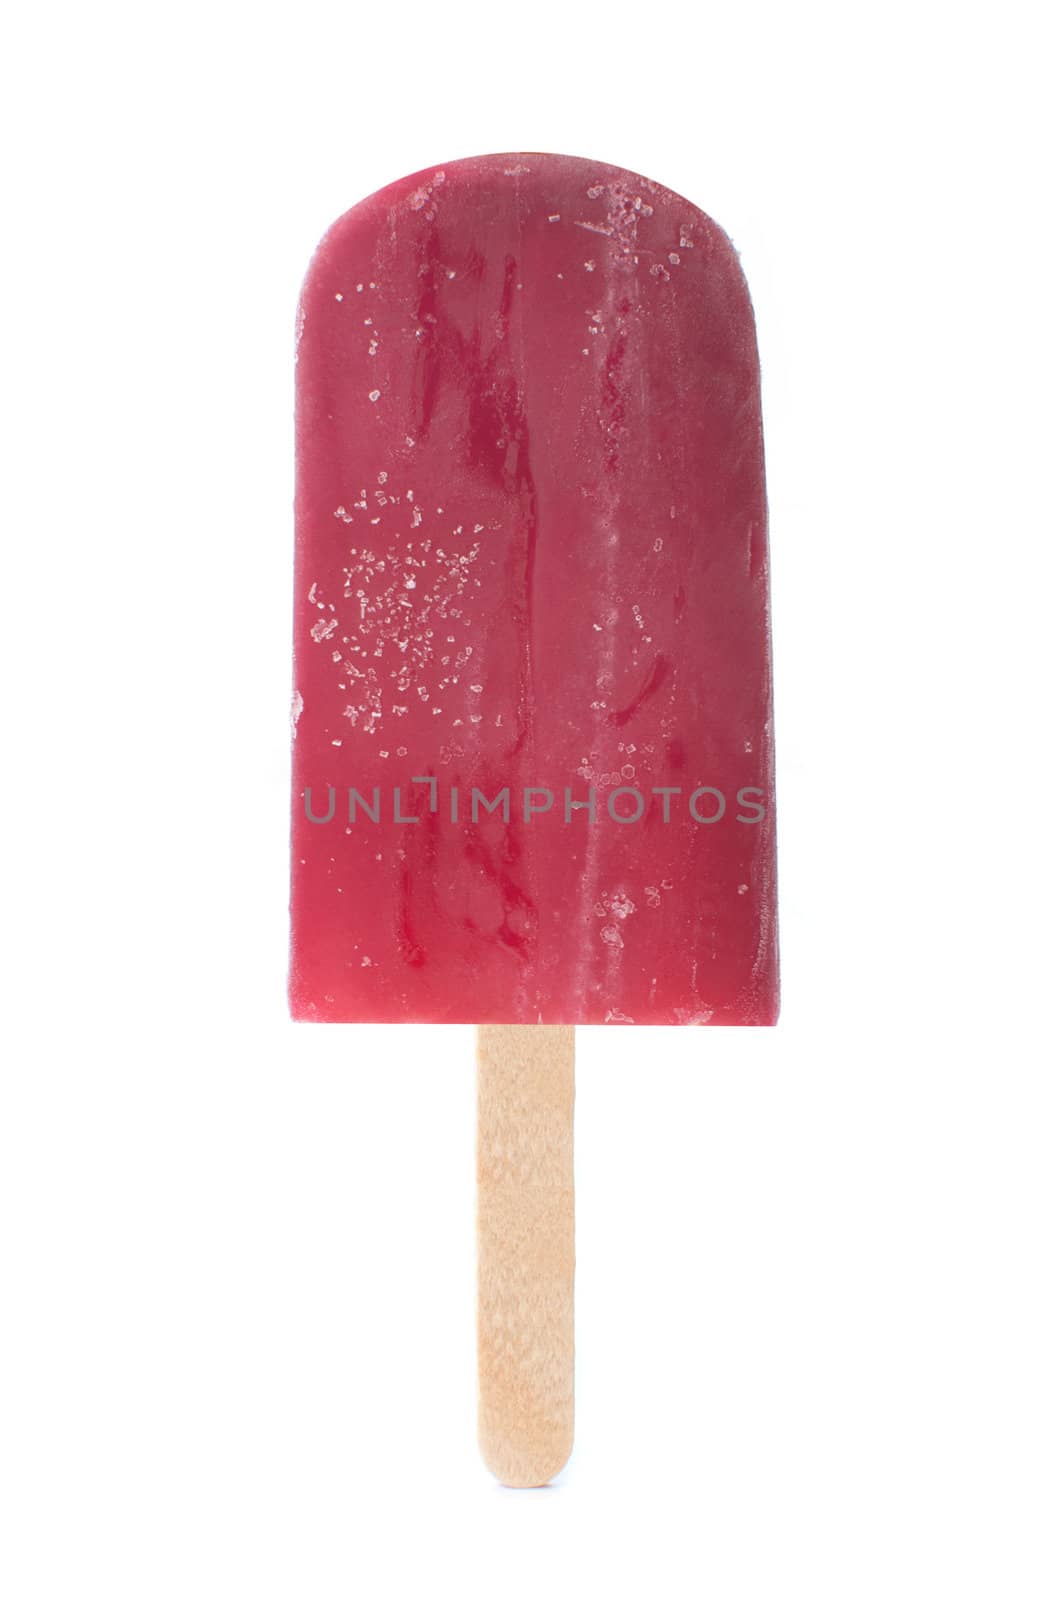 Red ice lolly over a white background